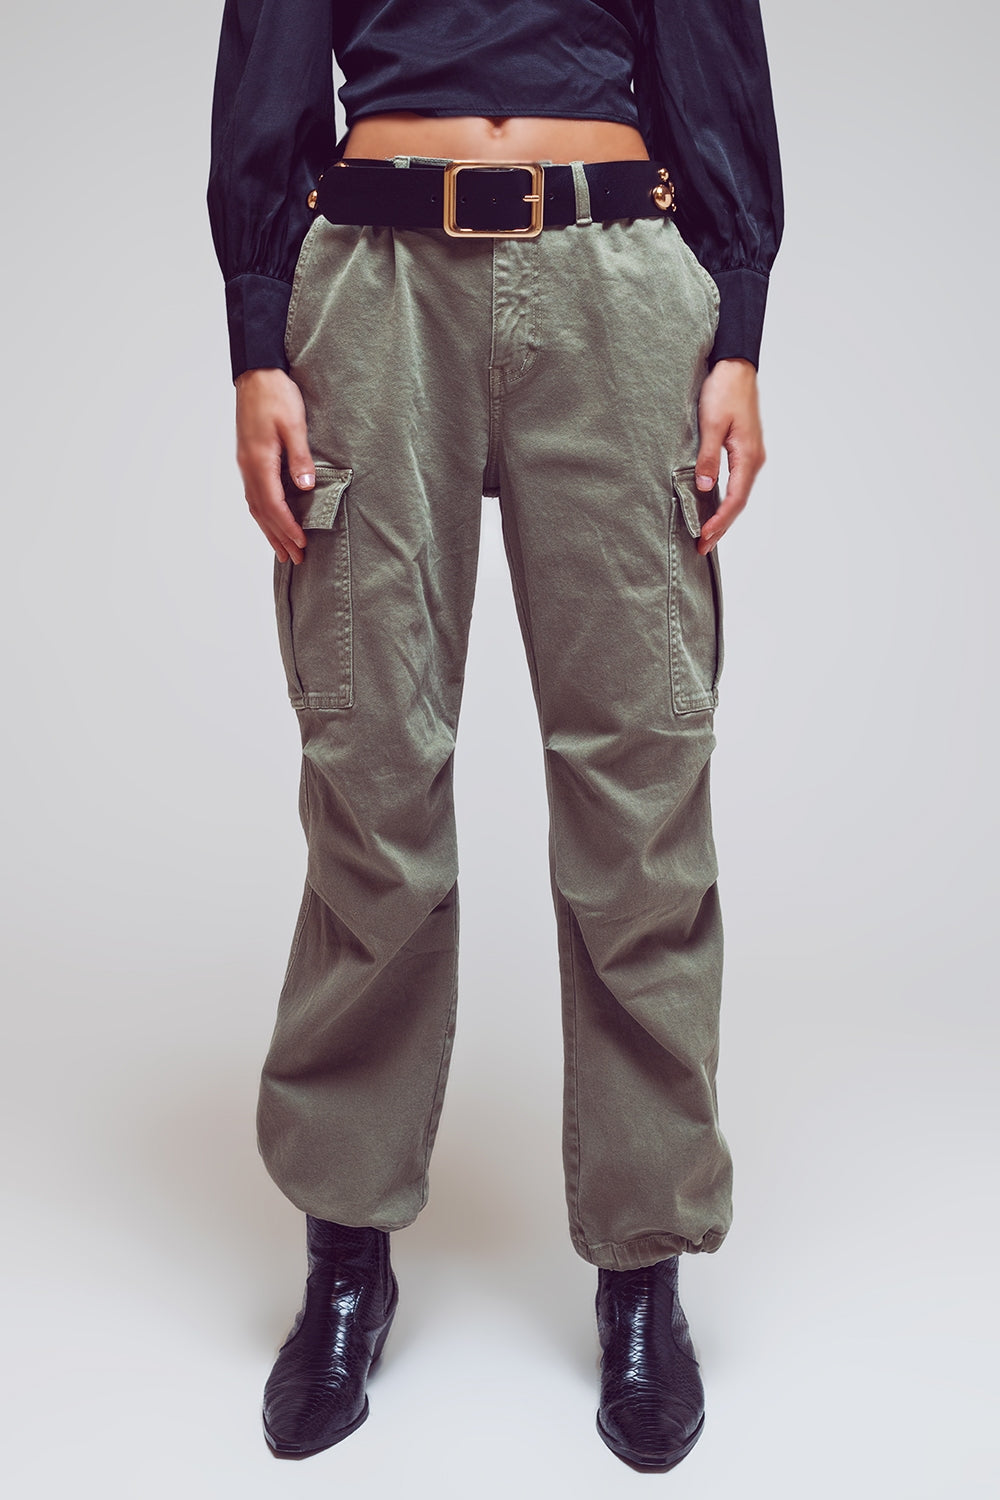 Q2 Cargo Pants with Tassel ends in Military Green